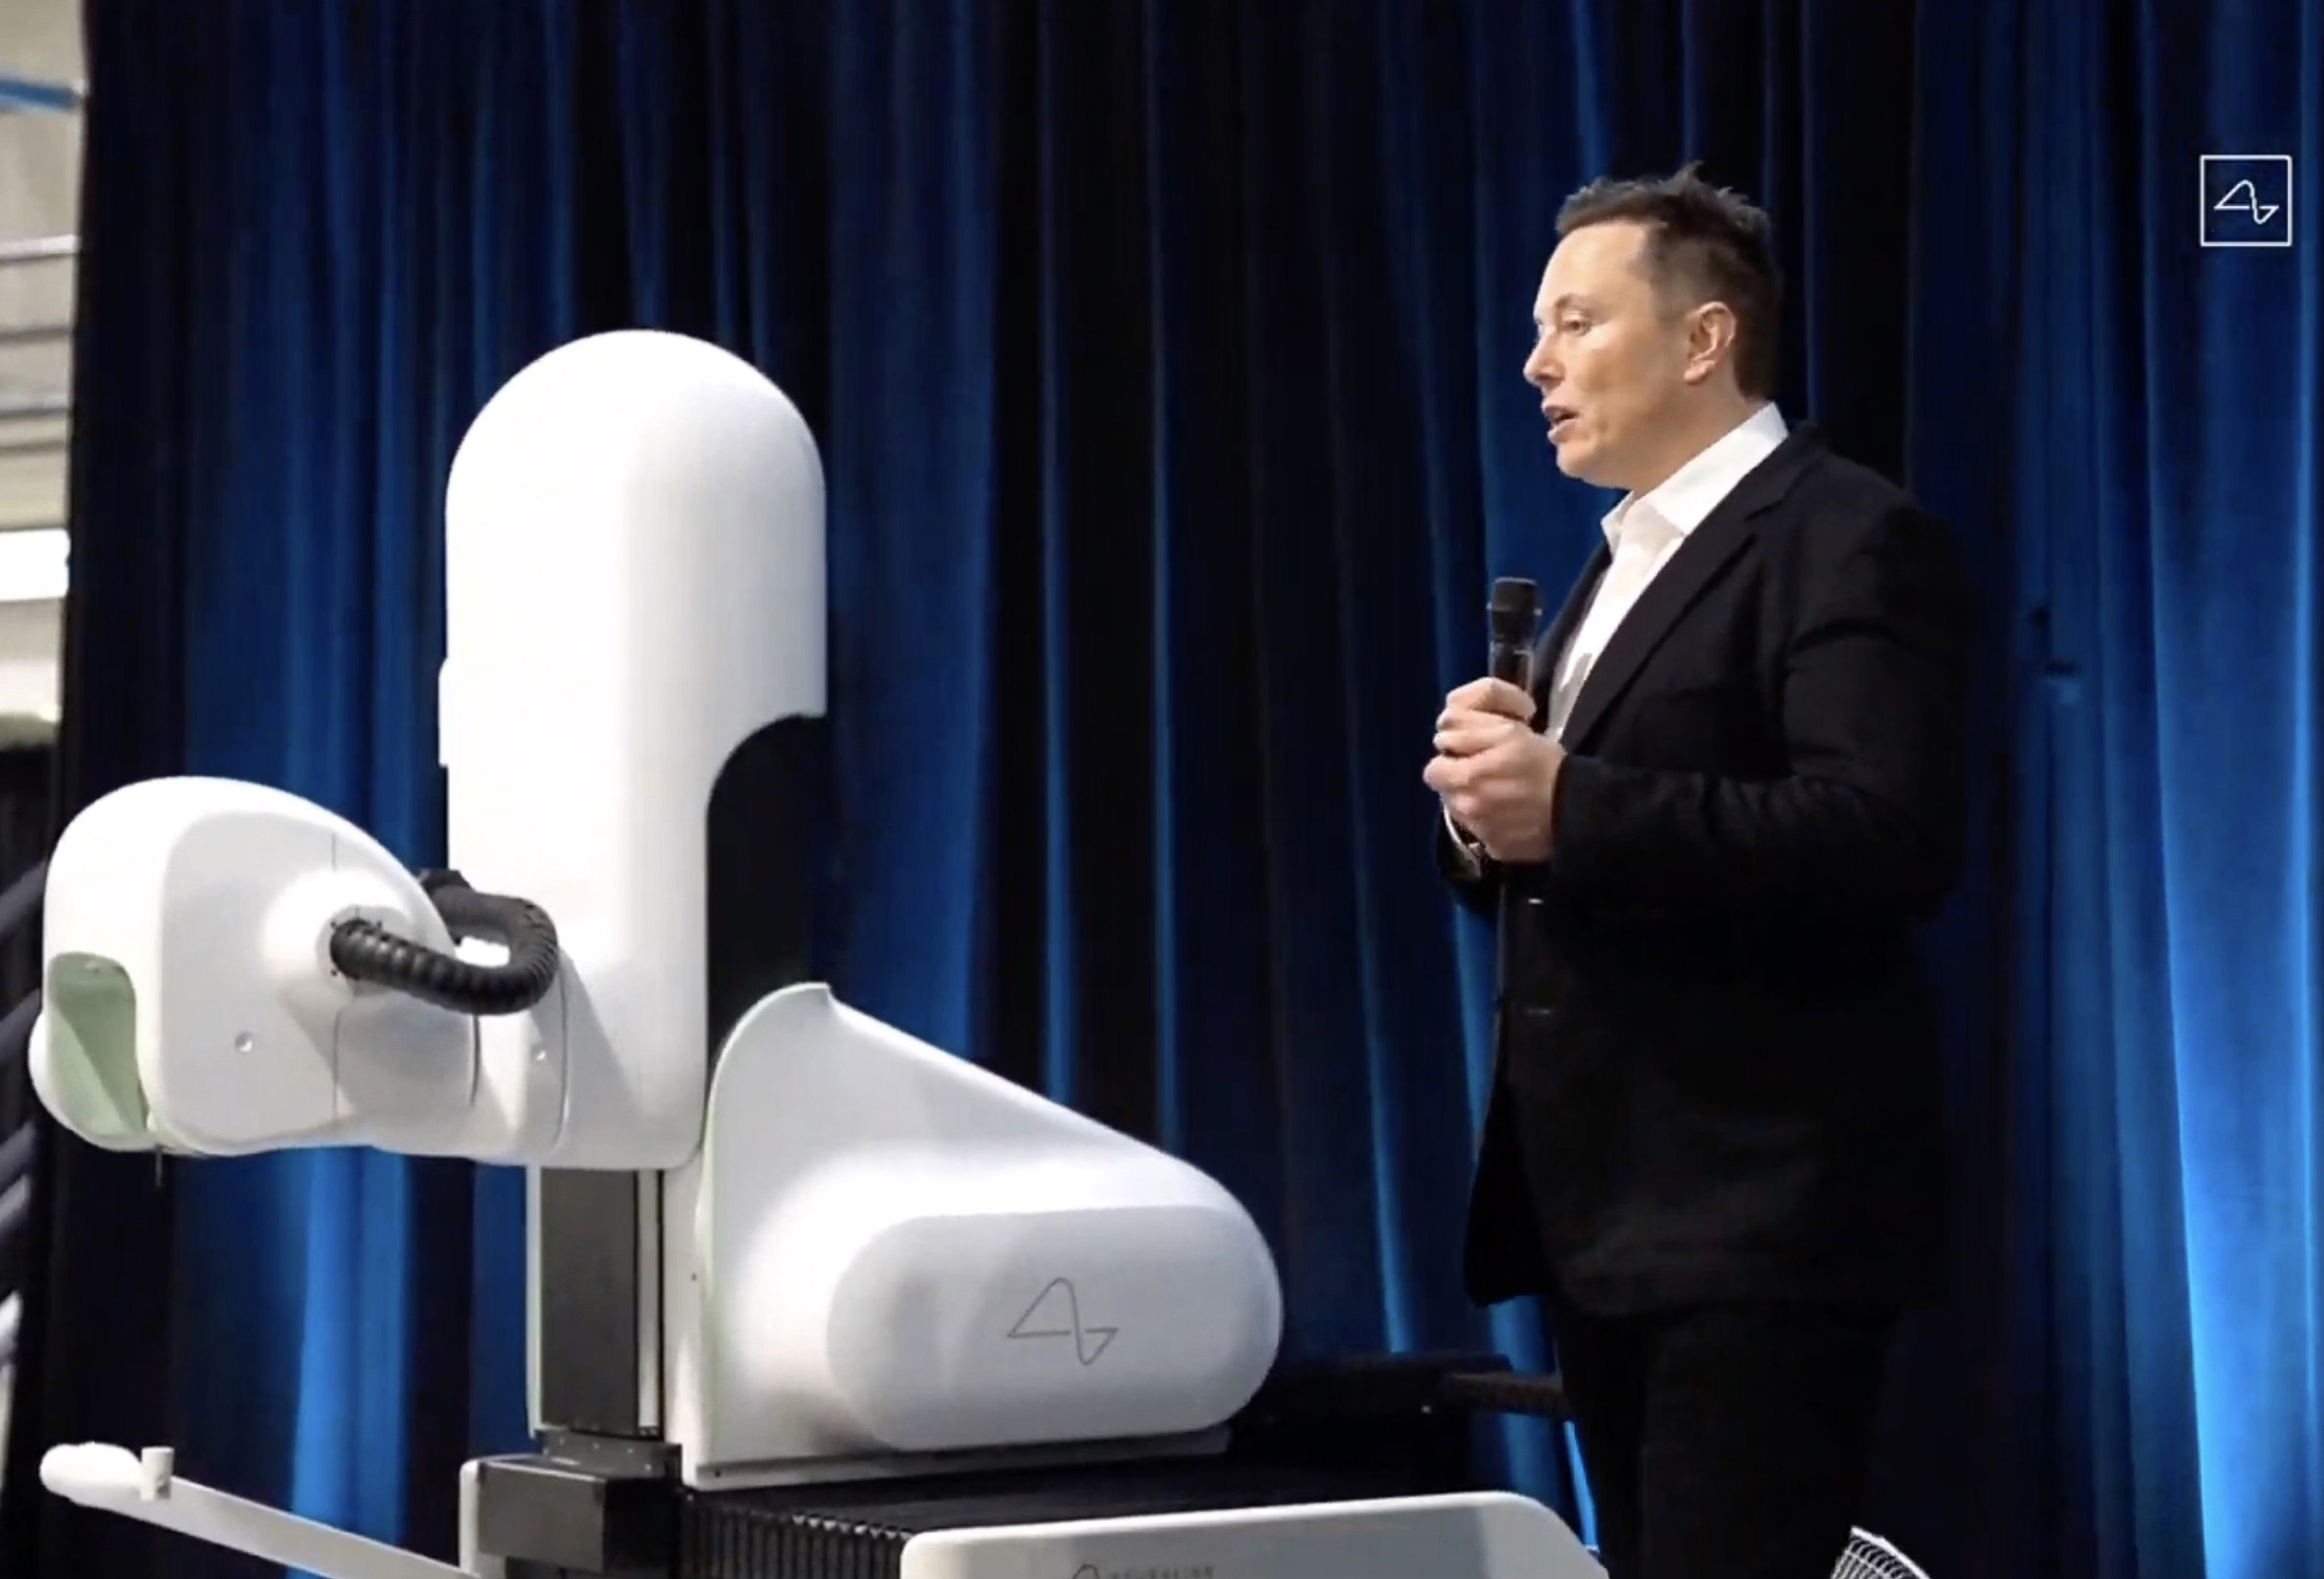 PHOTO: Elon Musk conducts a Neuralink livestream showing a surgical robot on Aug. 28, 2020. Futurist entrepreneur Elon Musk late demonstrated progress made by his Neuralink startup in meshing brains with computers.